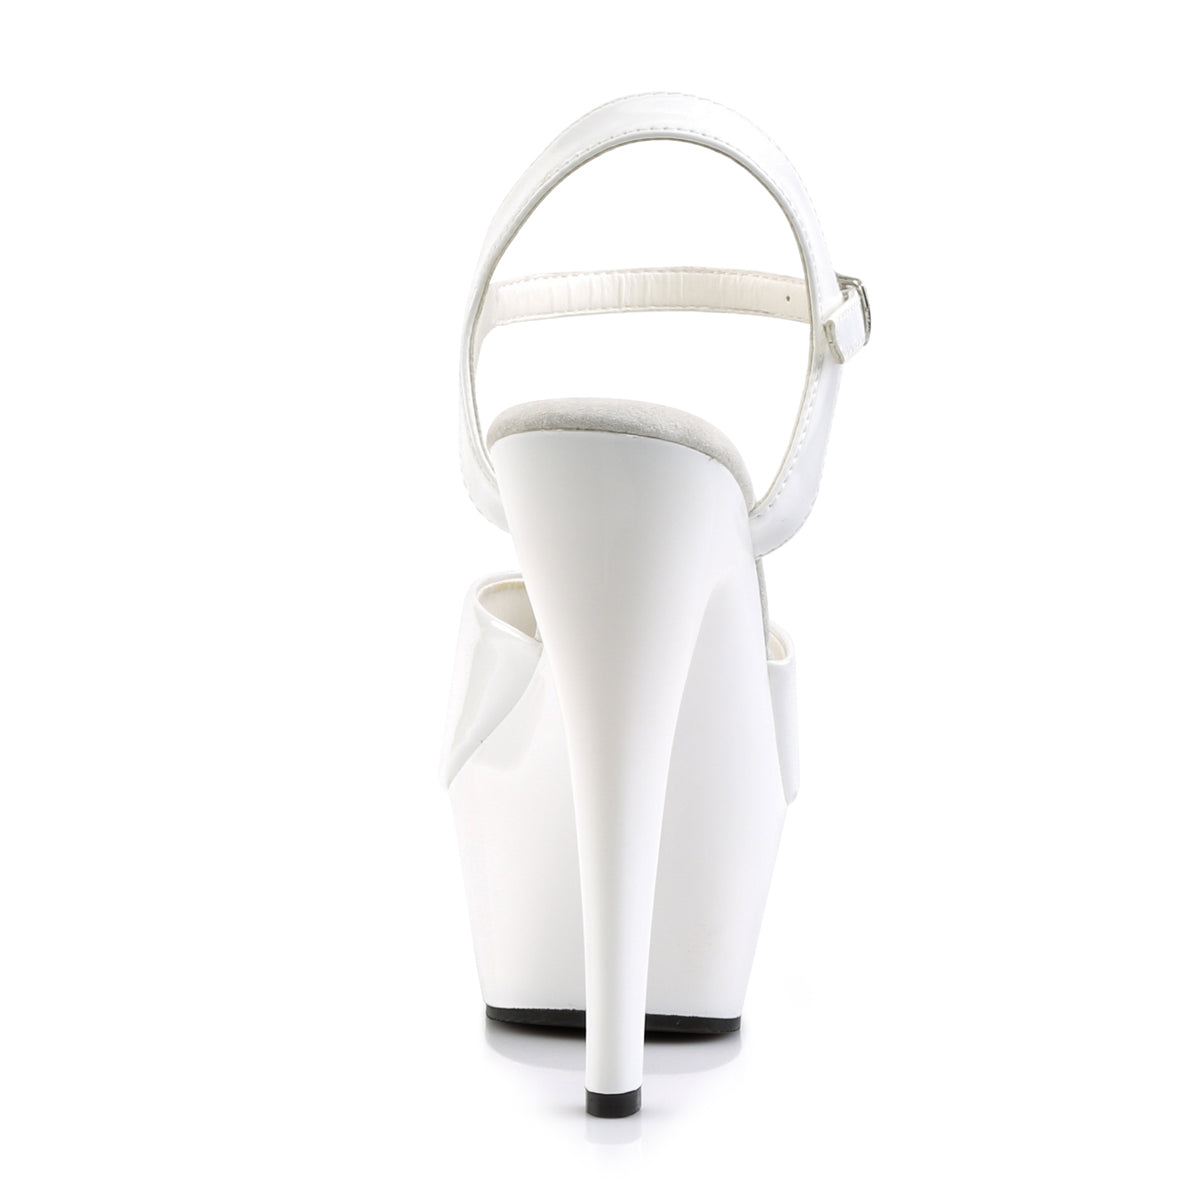 KISS-209 Pleaser 6" Heel White Patent Pole Dancing Platforms-Pleaser- Sexy Shoes Fetish Footwear